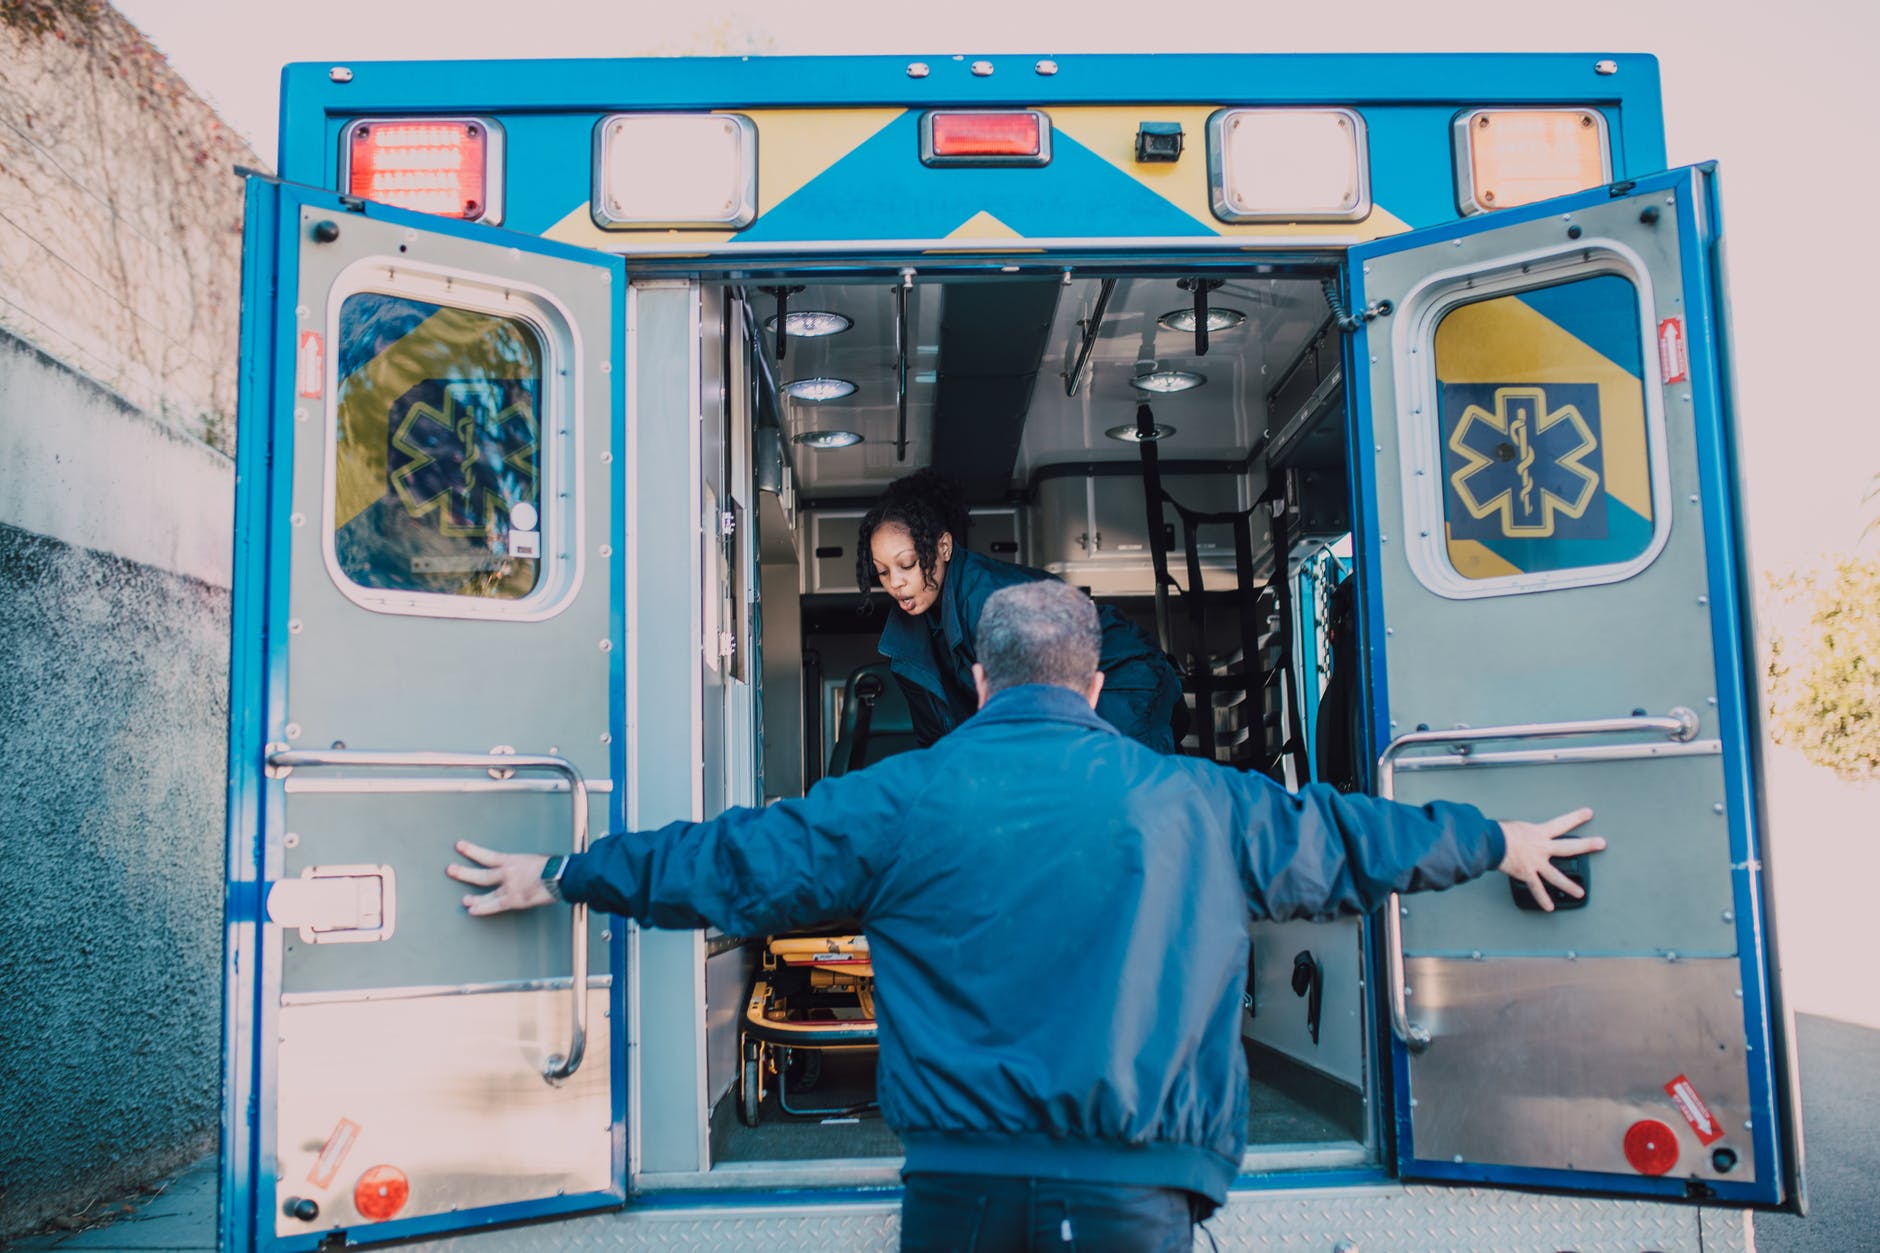 When Carla was being transferred to the ambulance, she thanked Ethan for saving her life | Source: Pexels